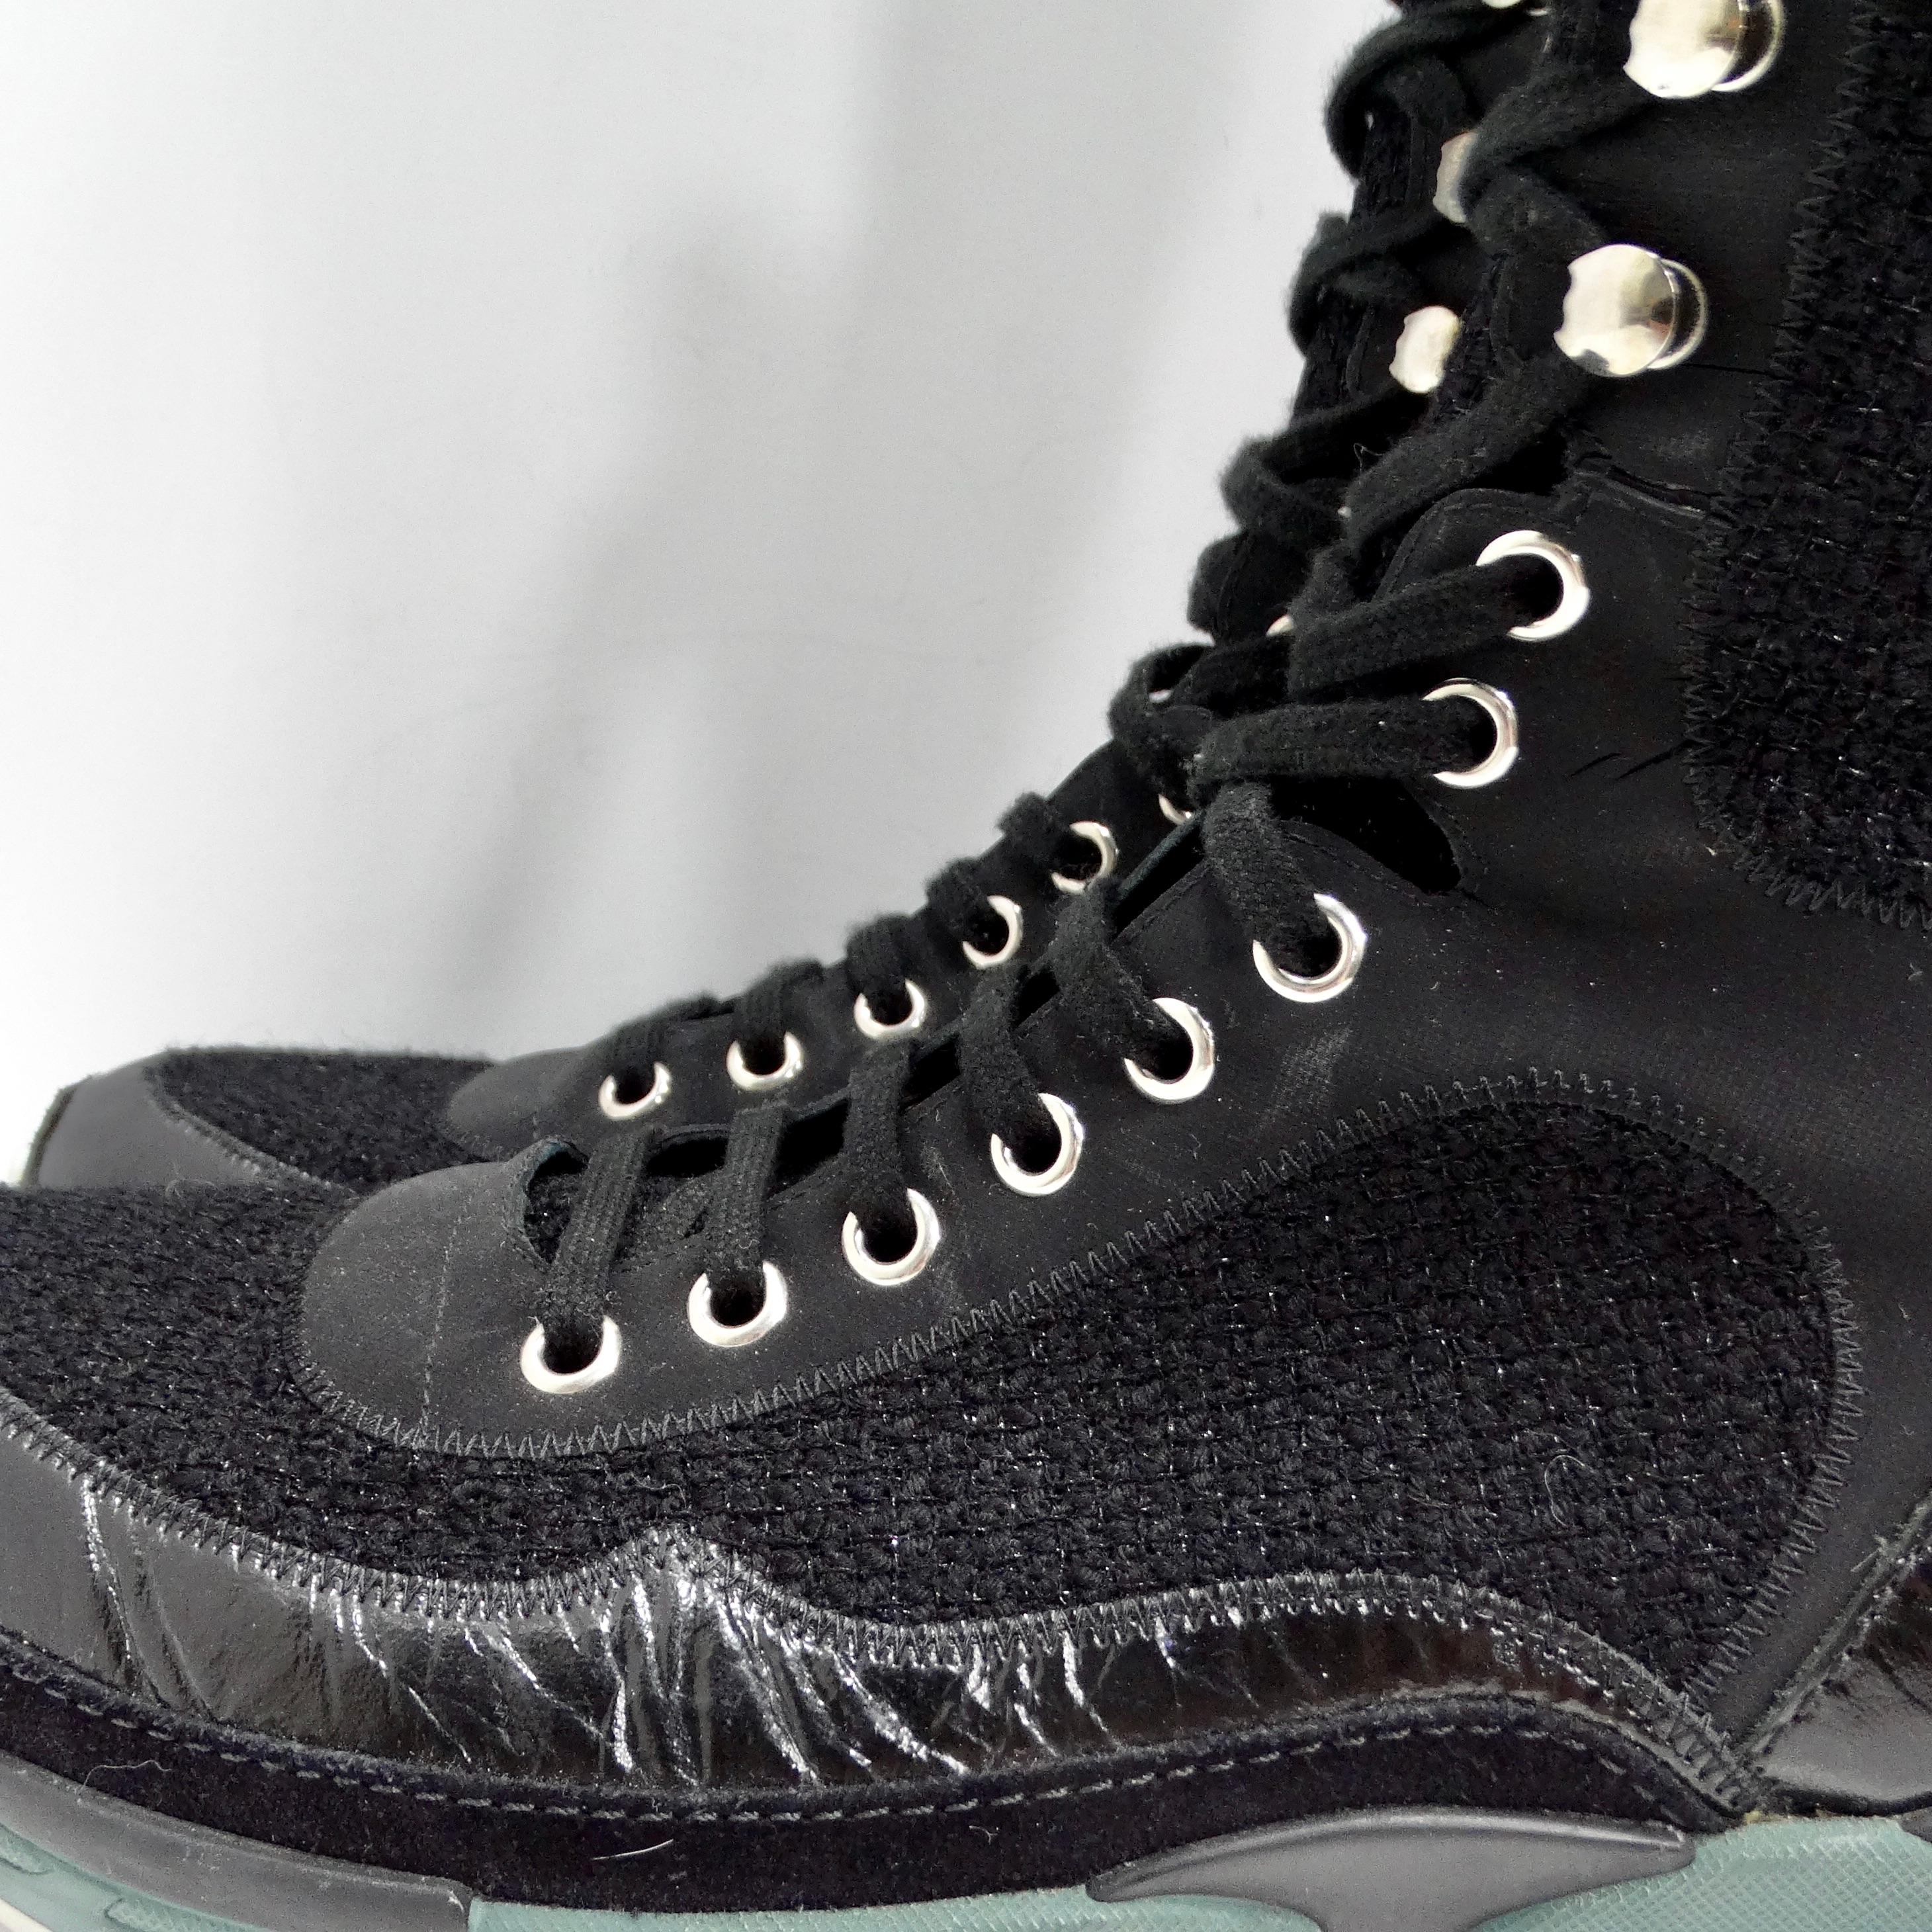 Chanel Fall 2014 Patent Calfskin Tweed Sneaker Boot For Sale 7